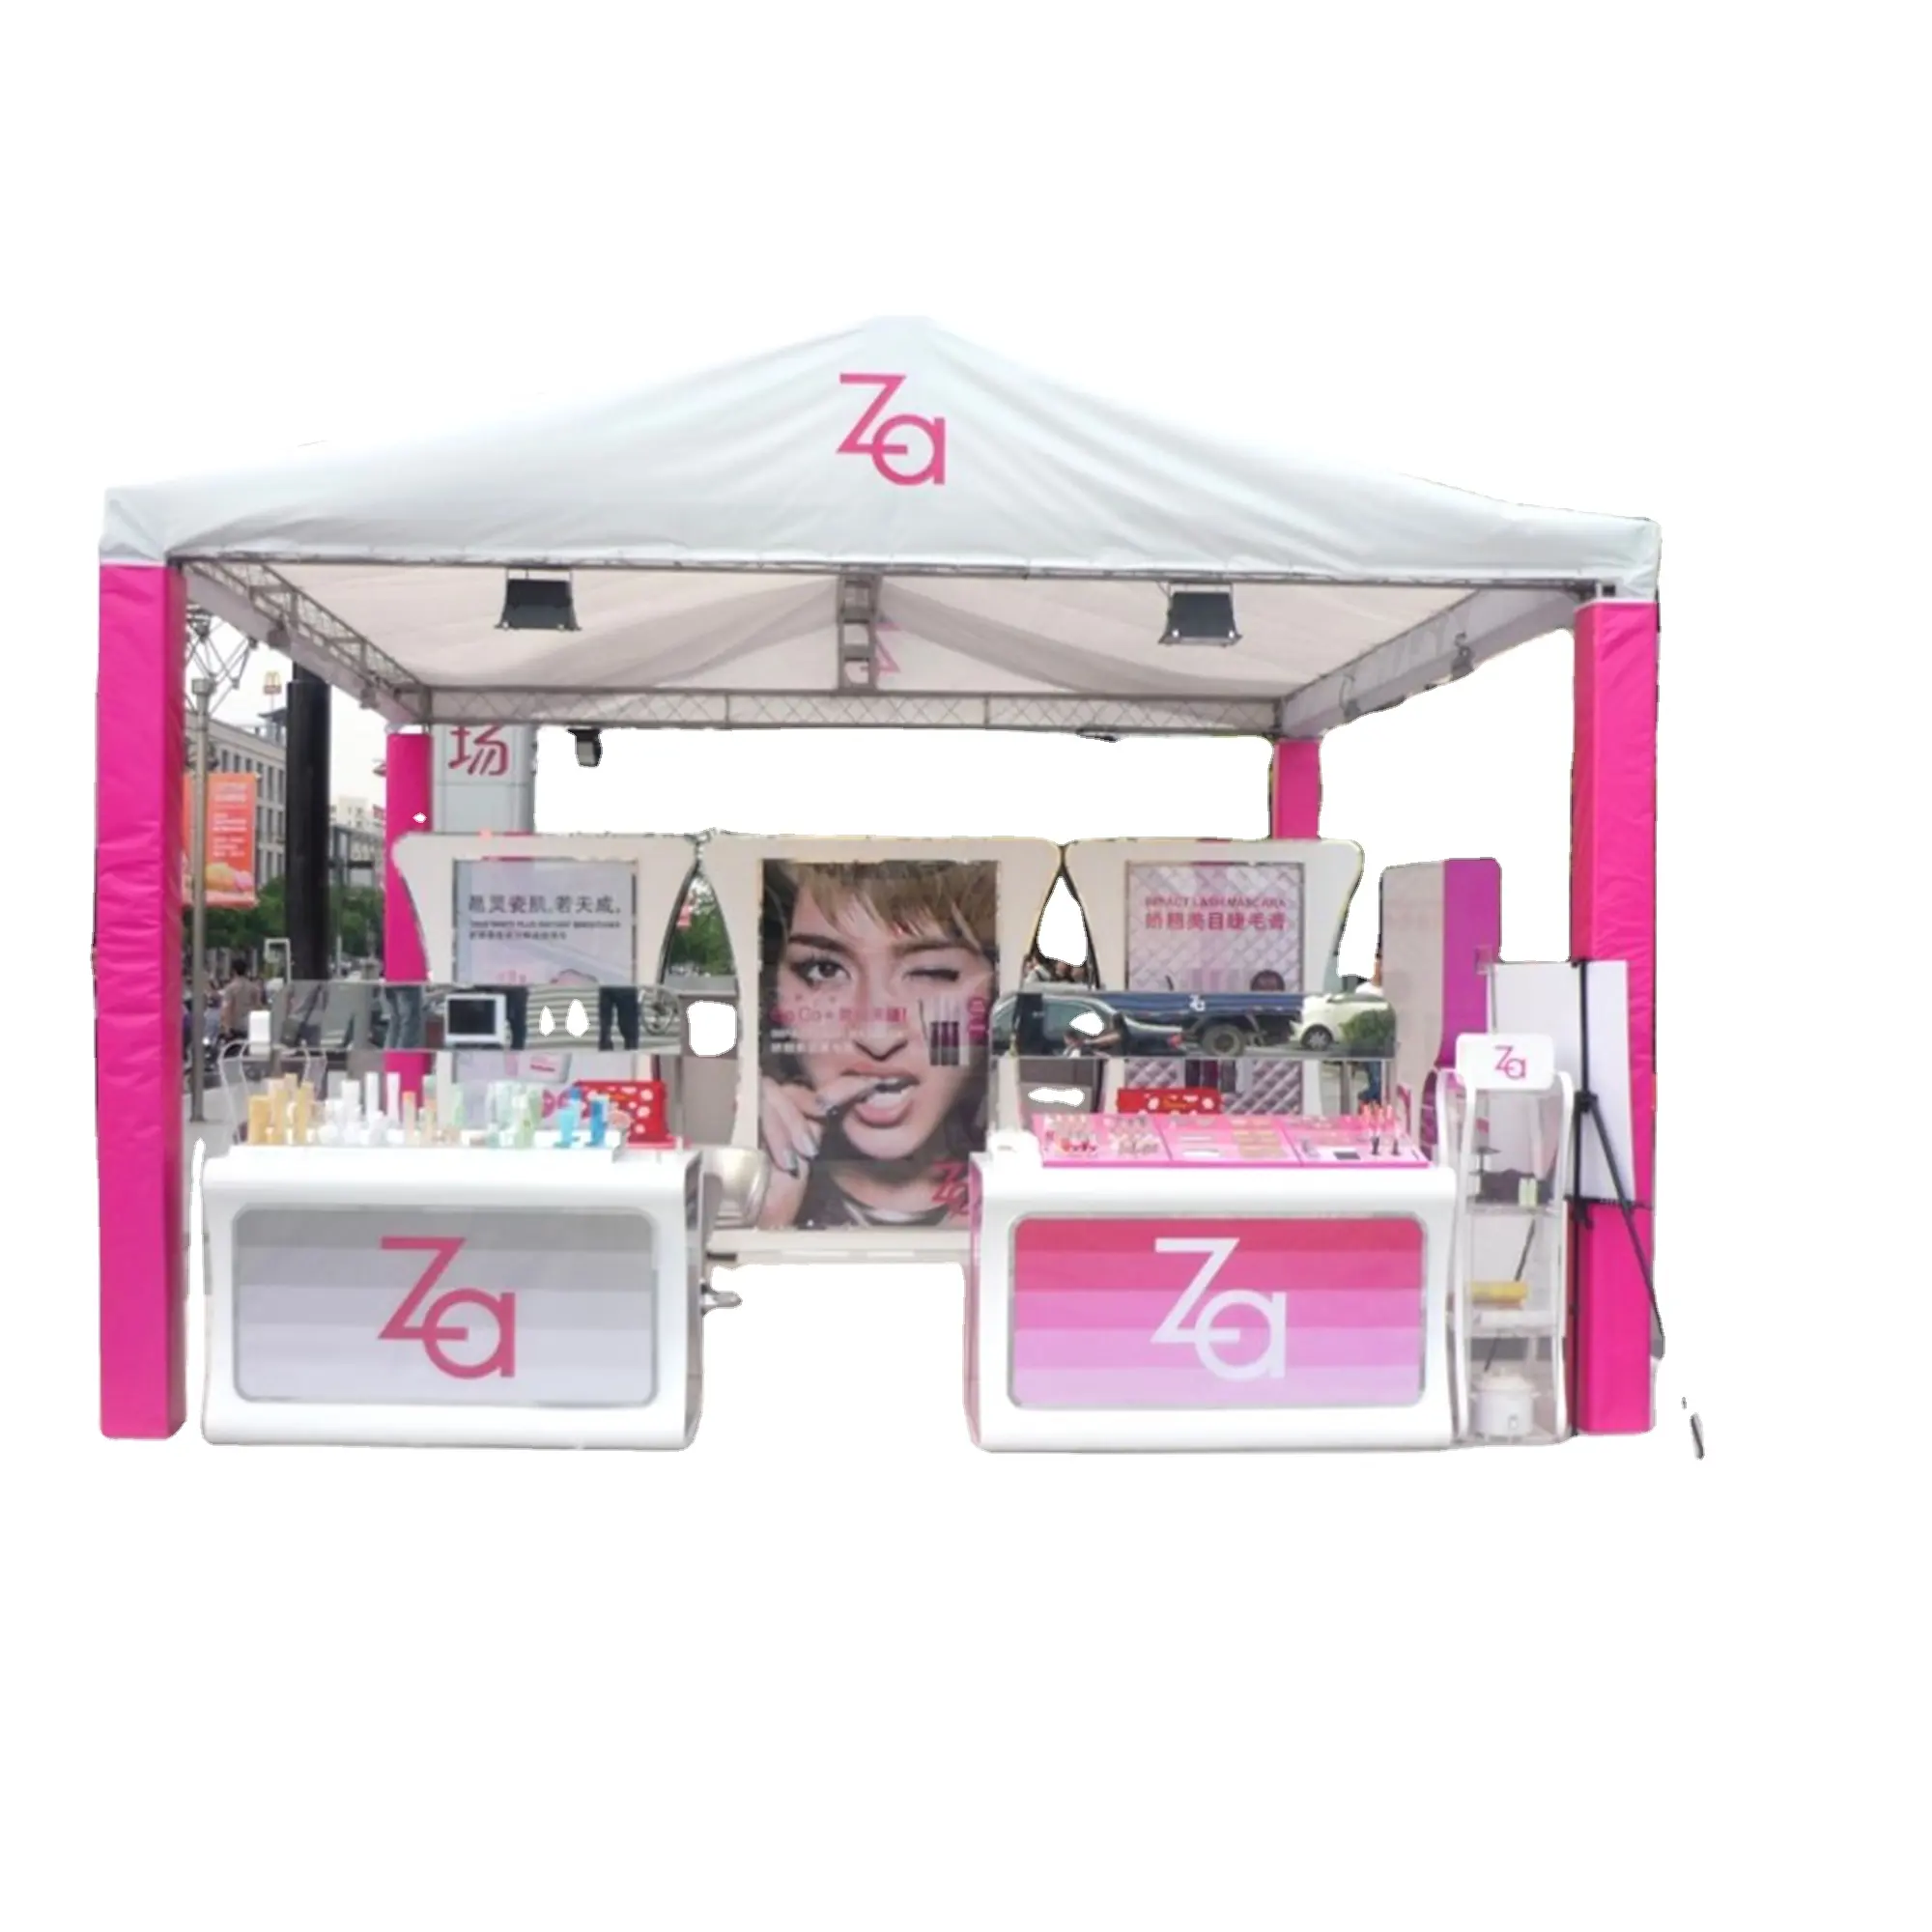 Hot Sale Professional Lower Price Podium Pop Up Store Display Design Display Stand